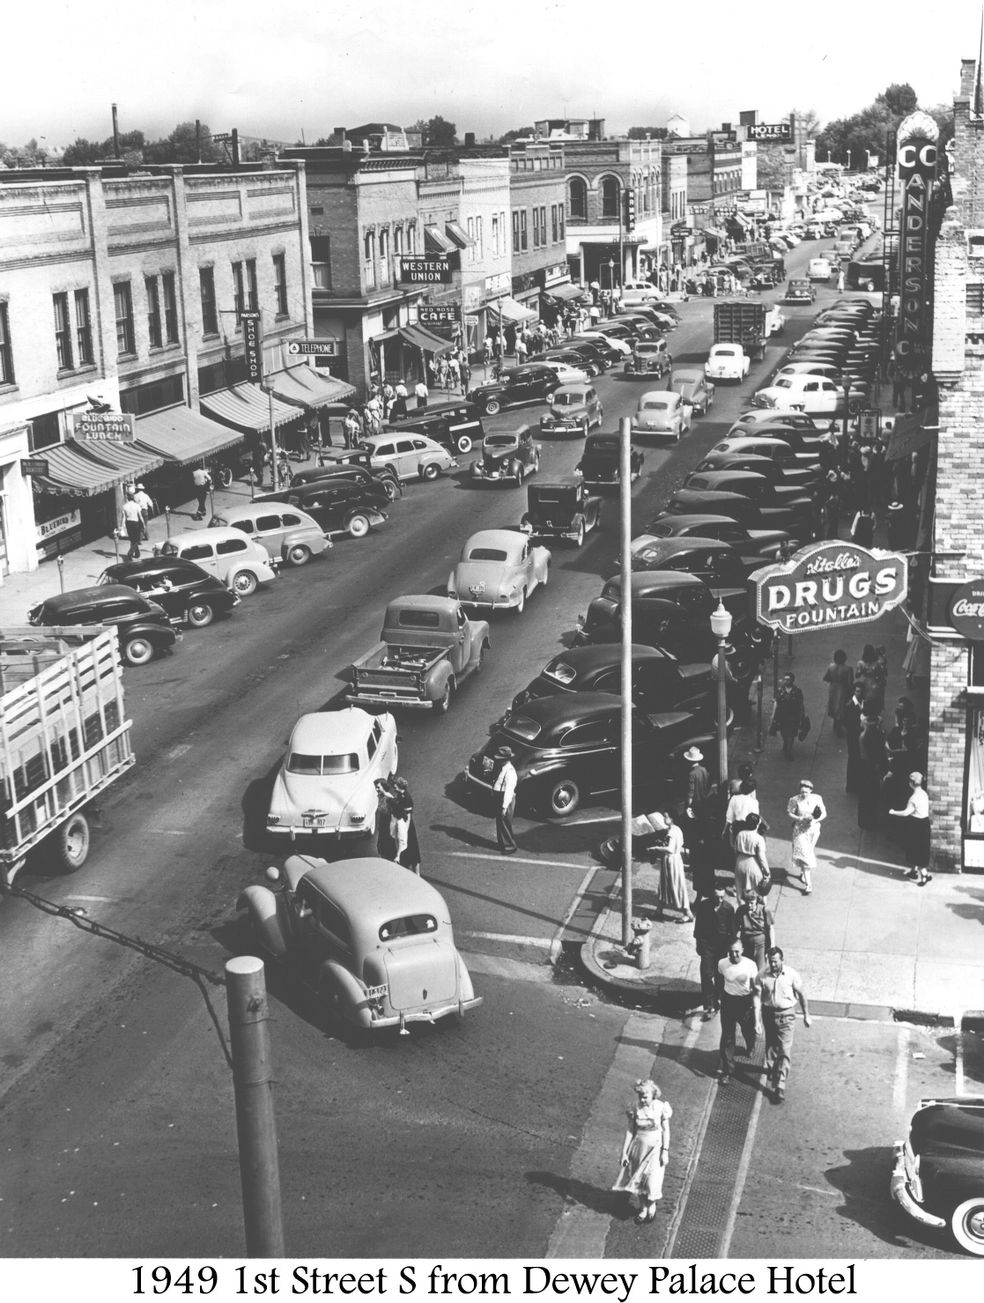 View of 1st South South in downtown Nampa from the balcony of the Dewey Palace Hotel in 1949